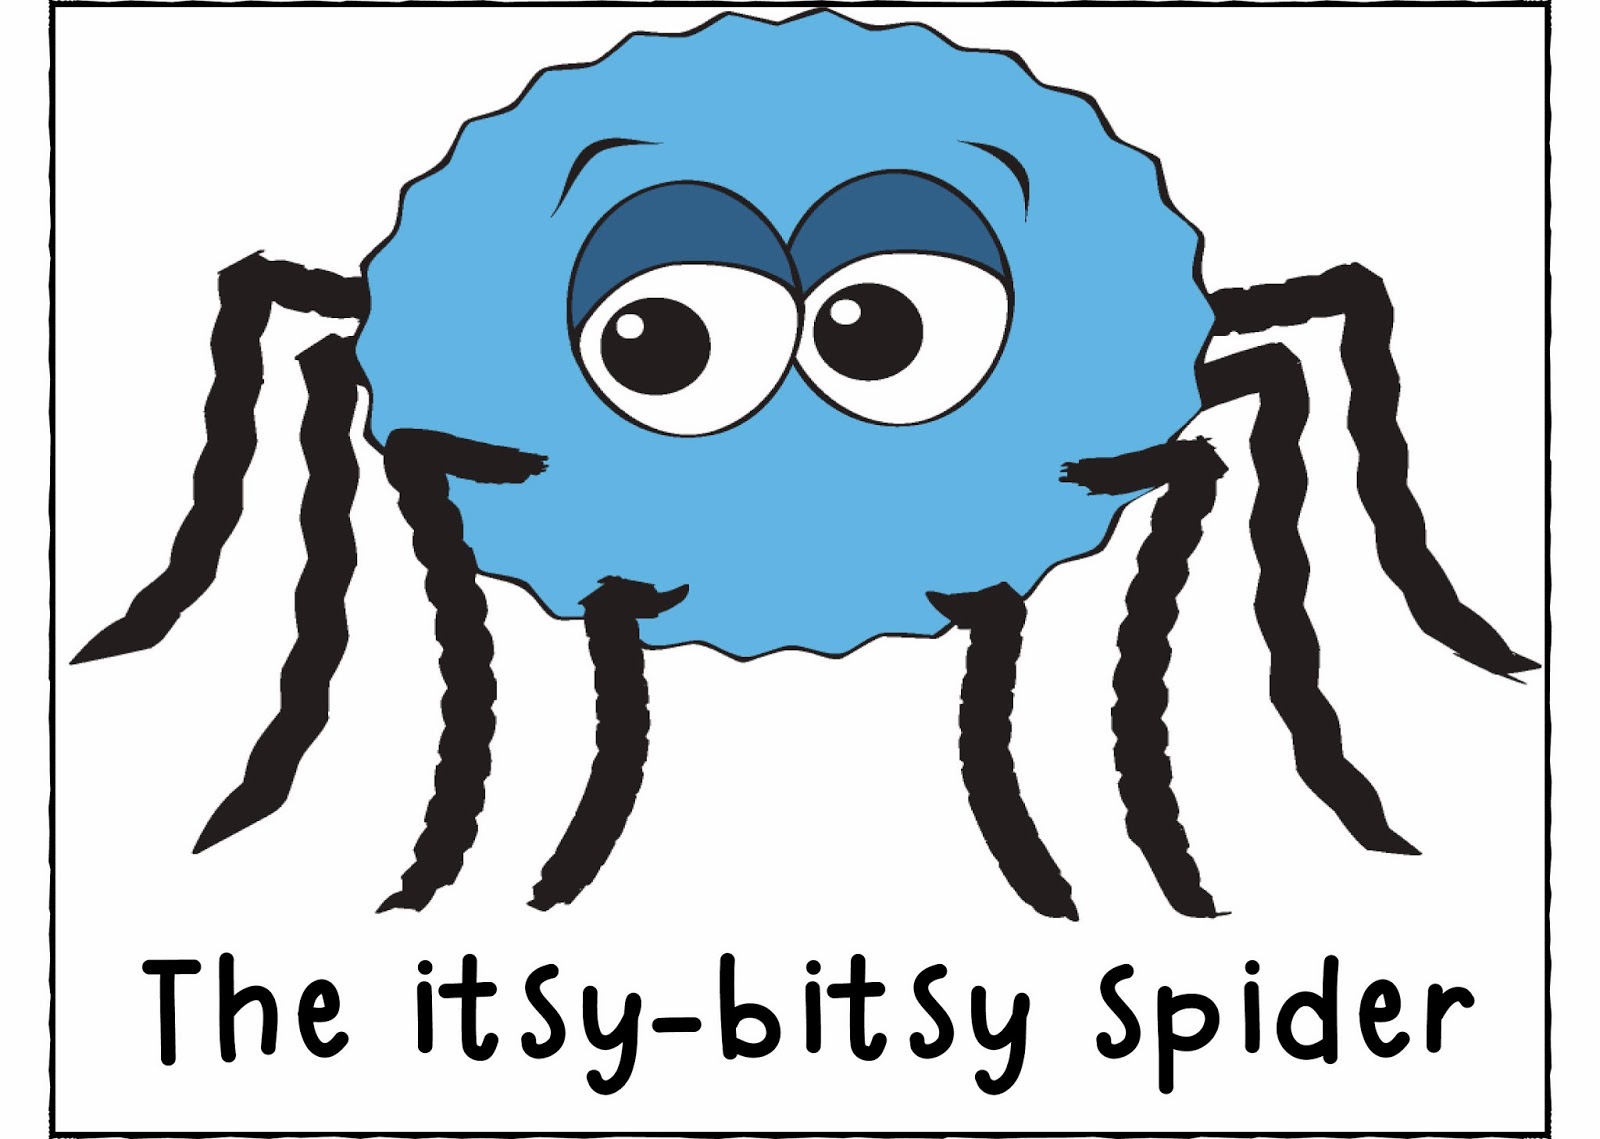 funny-miss-val-rie-itsy-bitsy-spider